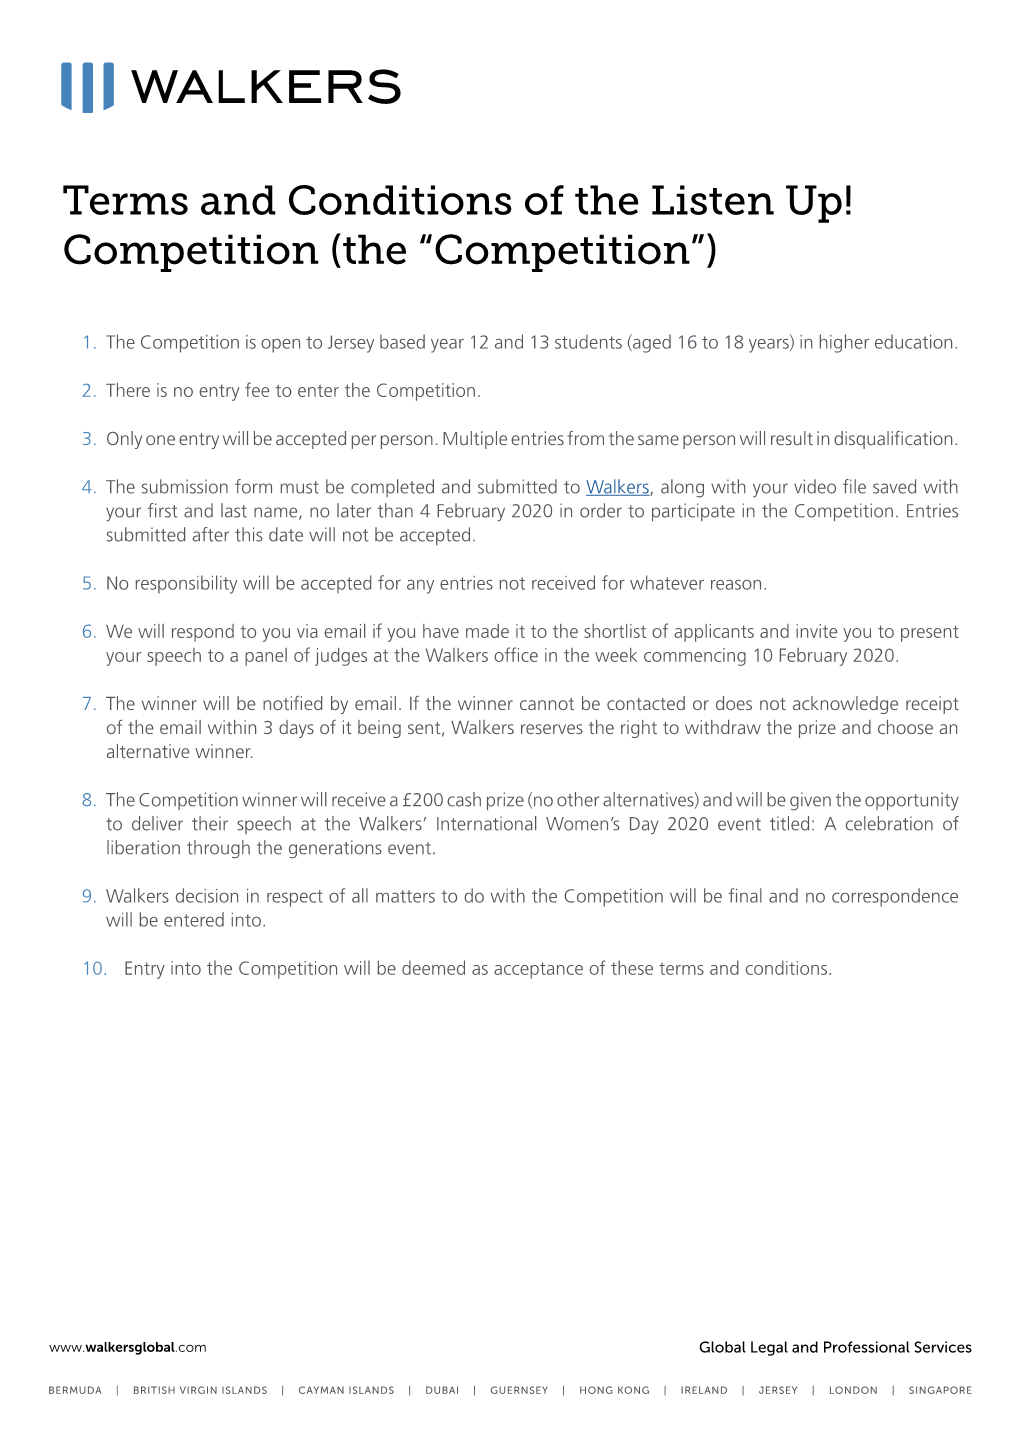 Competition (The “Competition”)